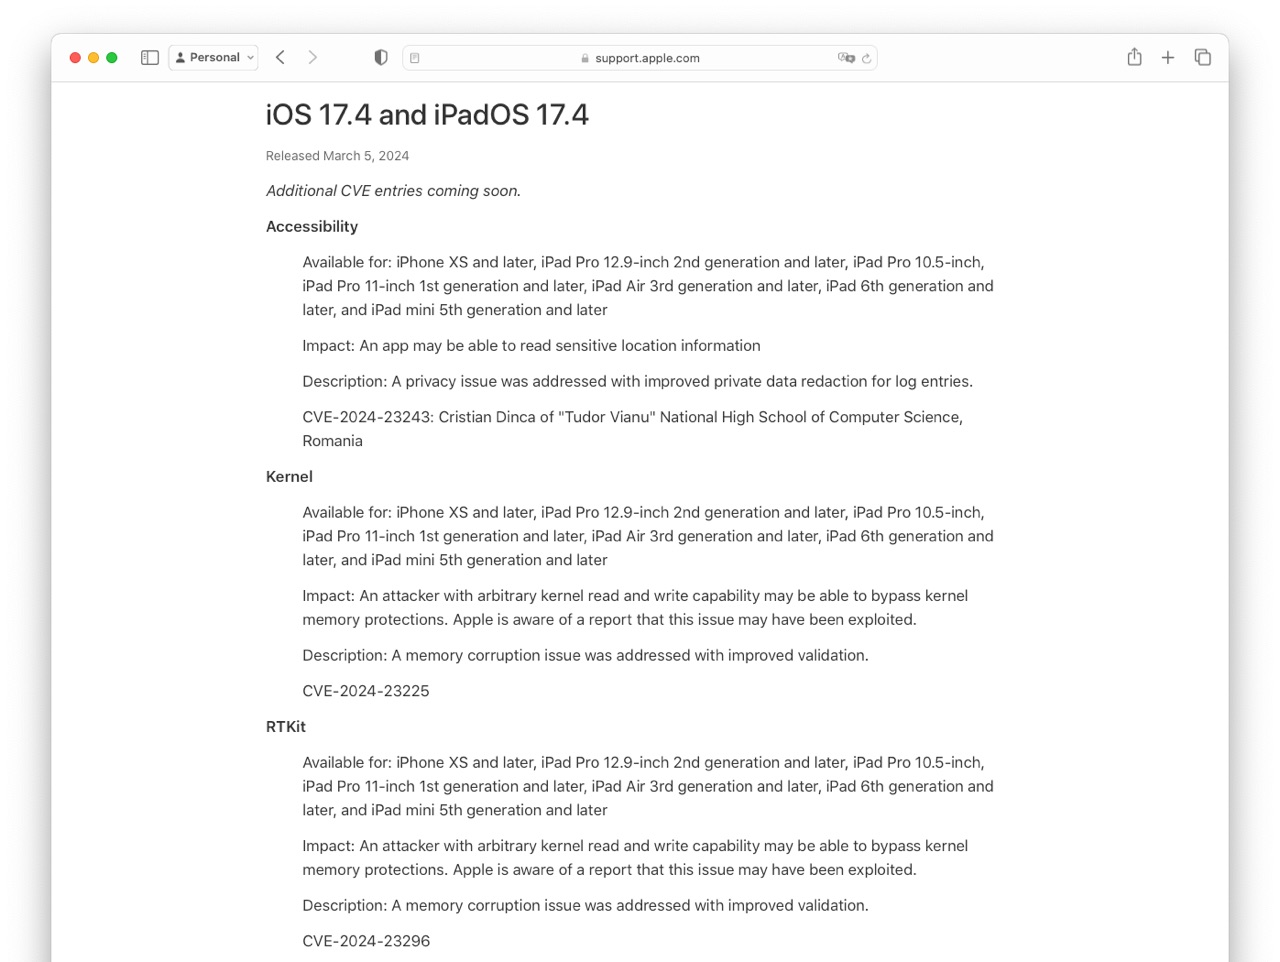 About the security content of iOS 17.4 and iPadOS 17.4